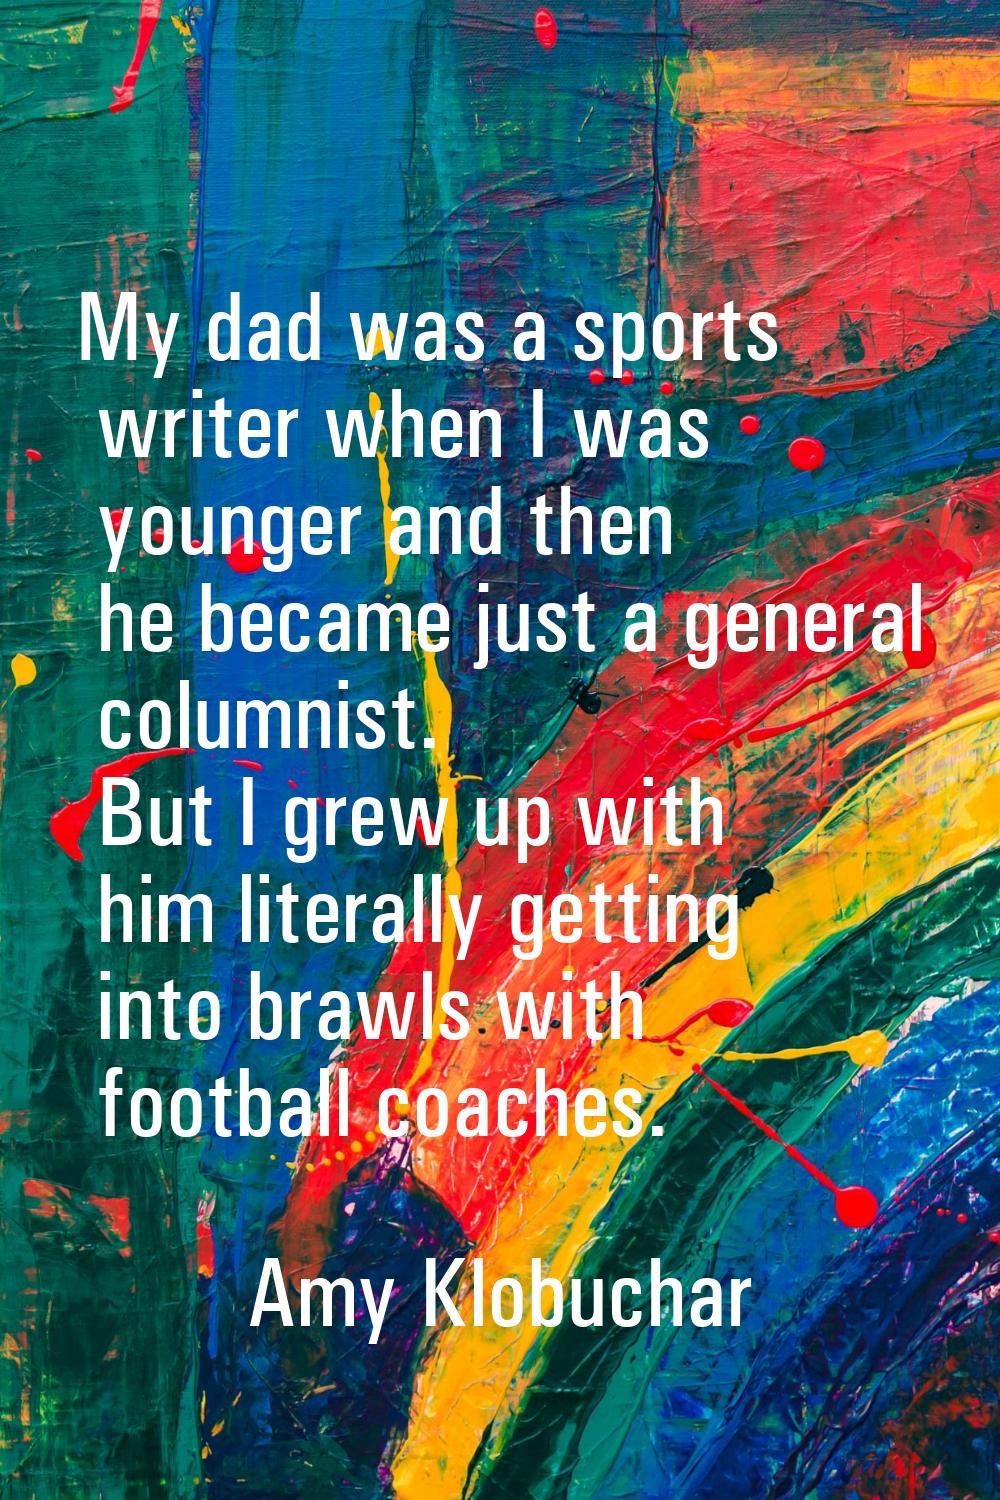 My dad was a sports writer when I was younger and then he became just a general columnist. But I gr